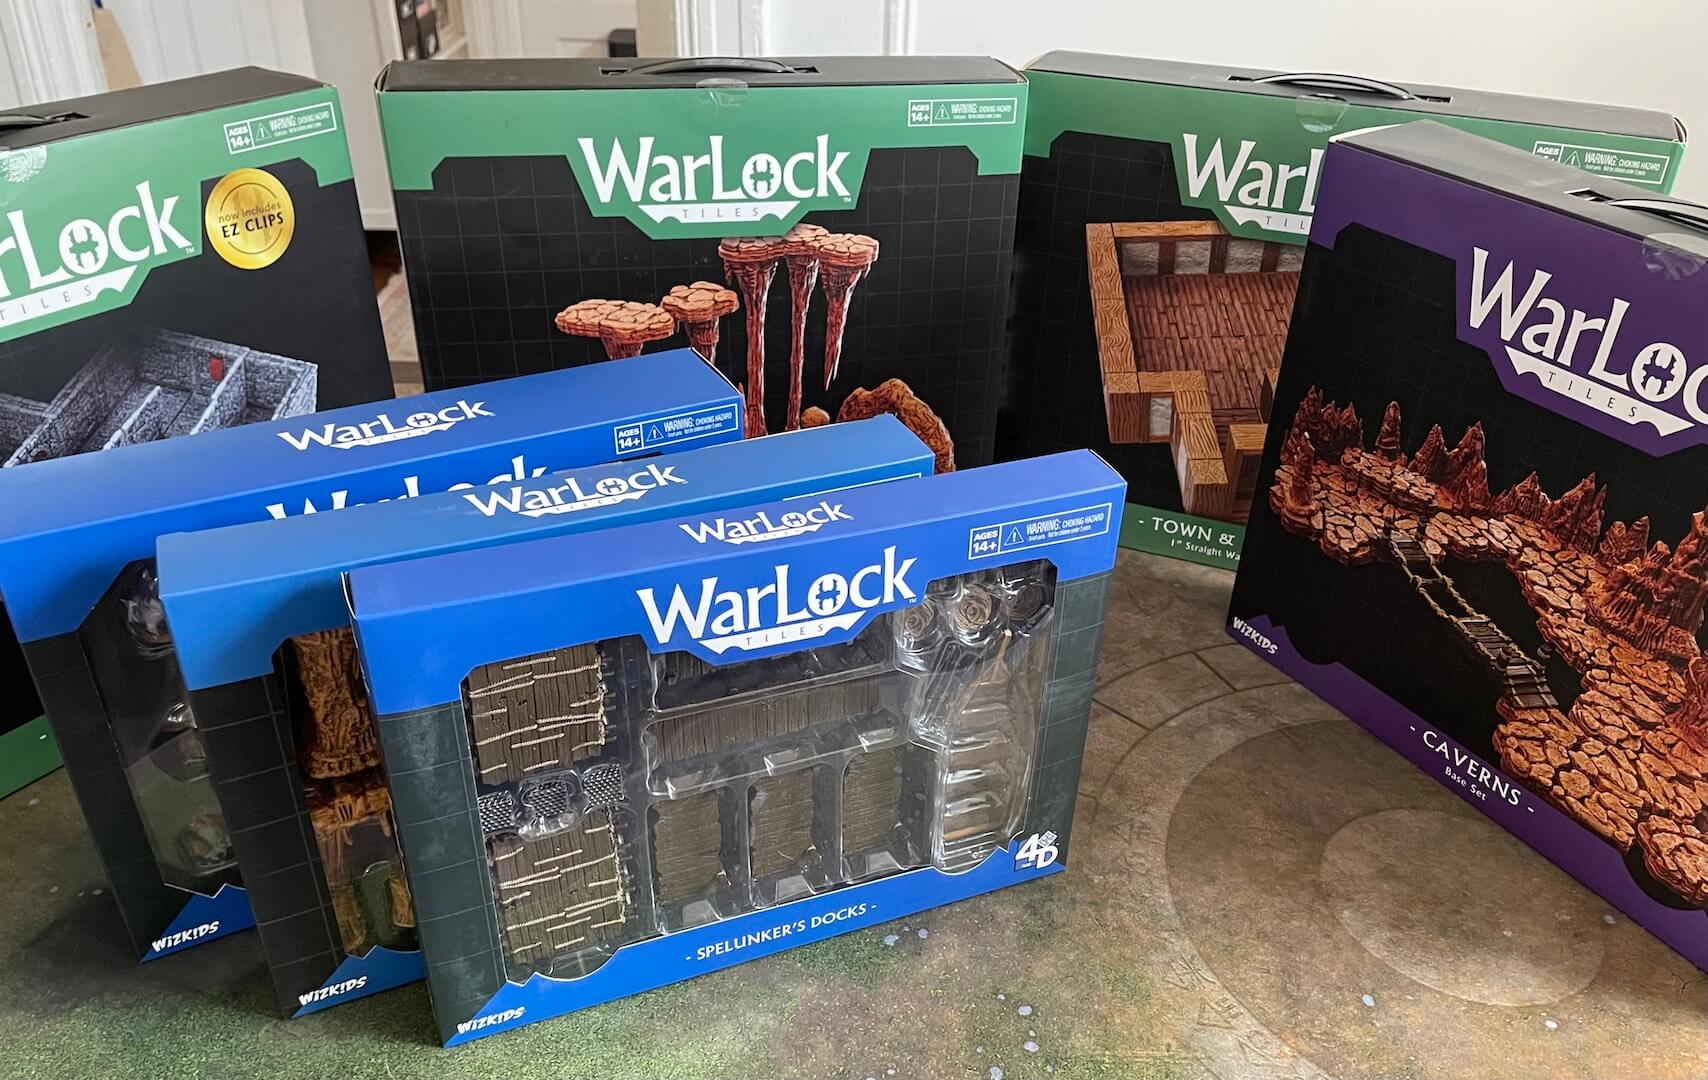 WizKids sent along a full suite of their WarLock tiles for us to check out, and we quickly put them to good use.